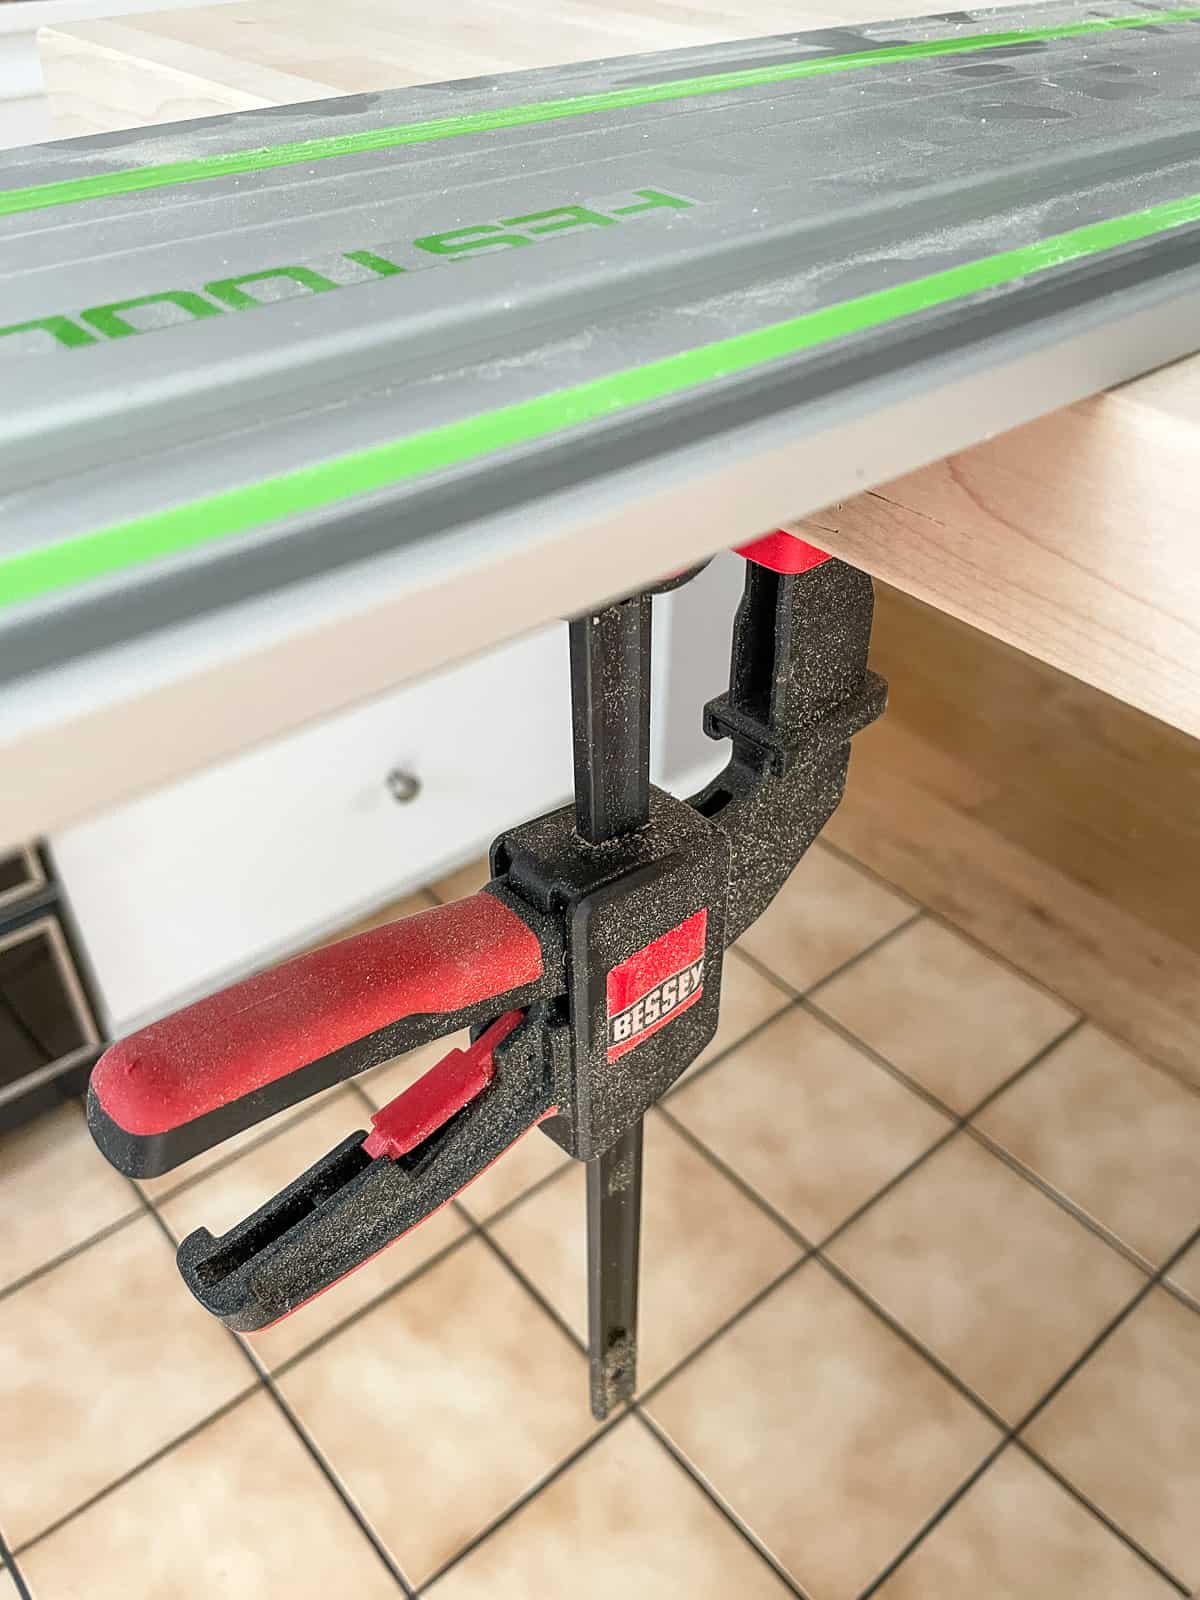 Bessey track saw clamp holding track to butcher block countertop